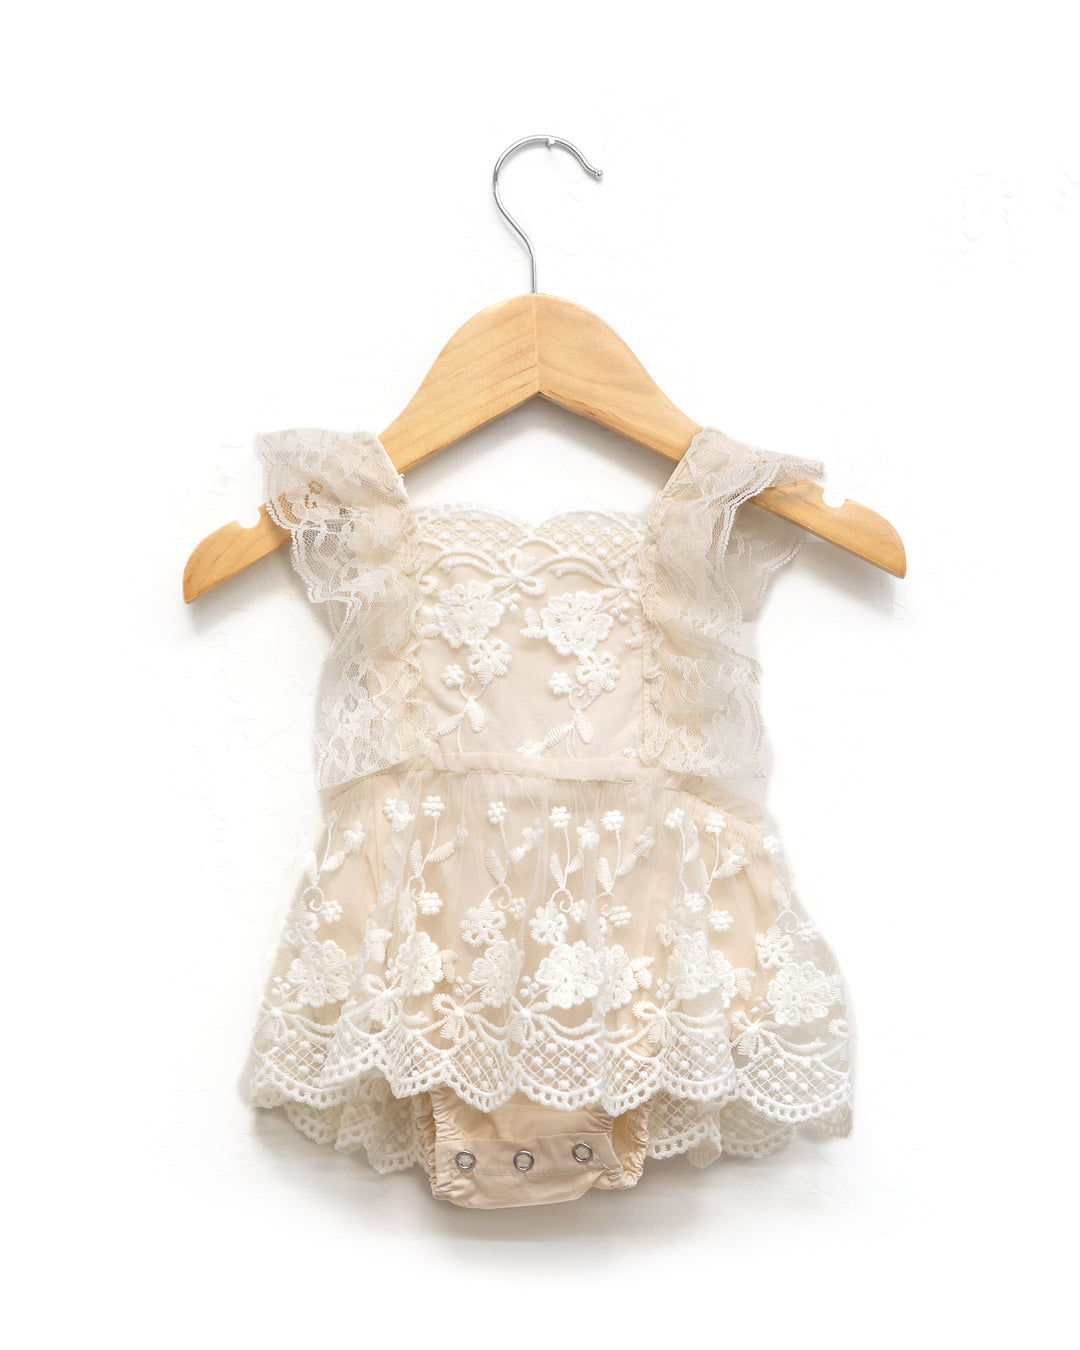 Everly Lace Romper in Ivory